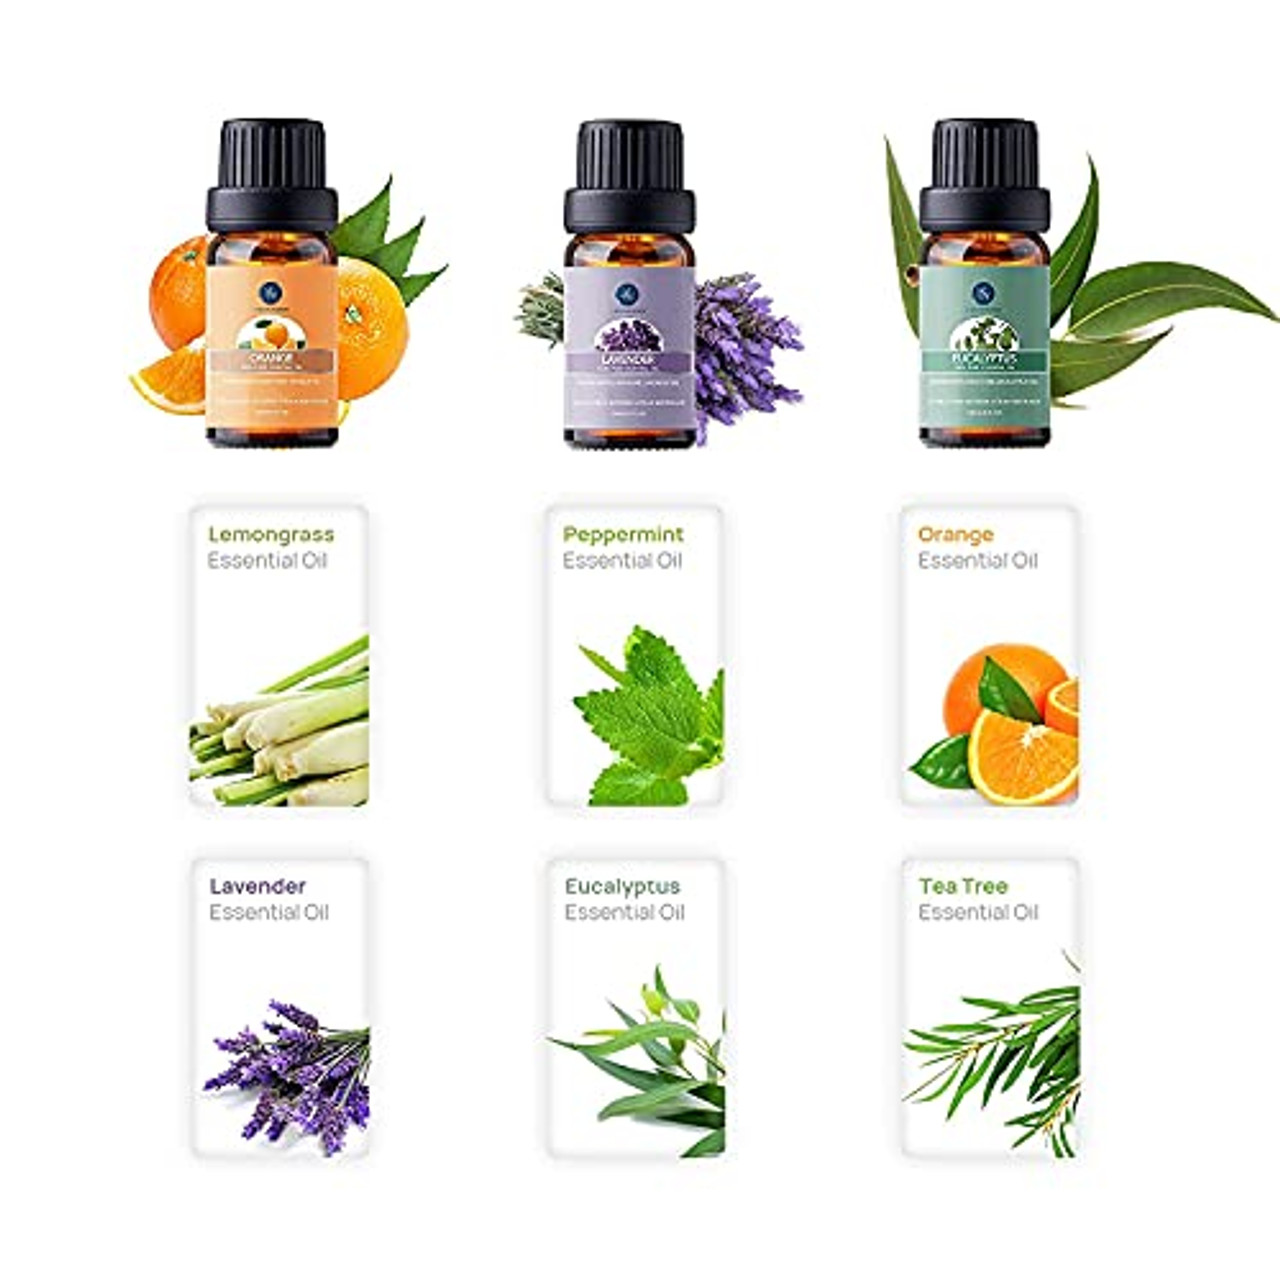 Essential Oils Top 6 Gift Set Pure Essential Oils for Diffuser, Humidifier,  Massage, Aromatherapy